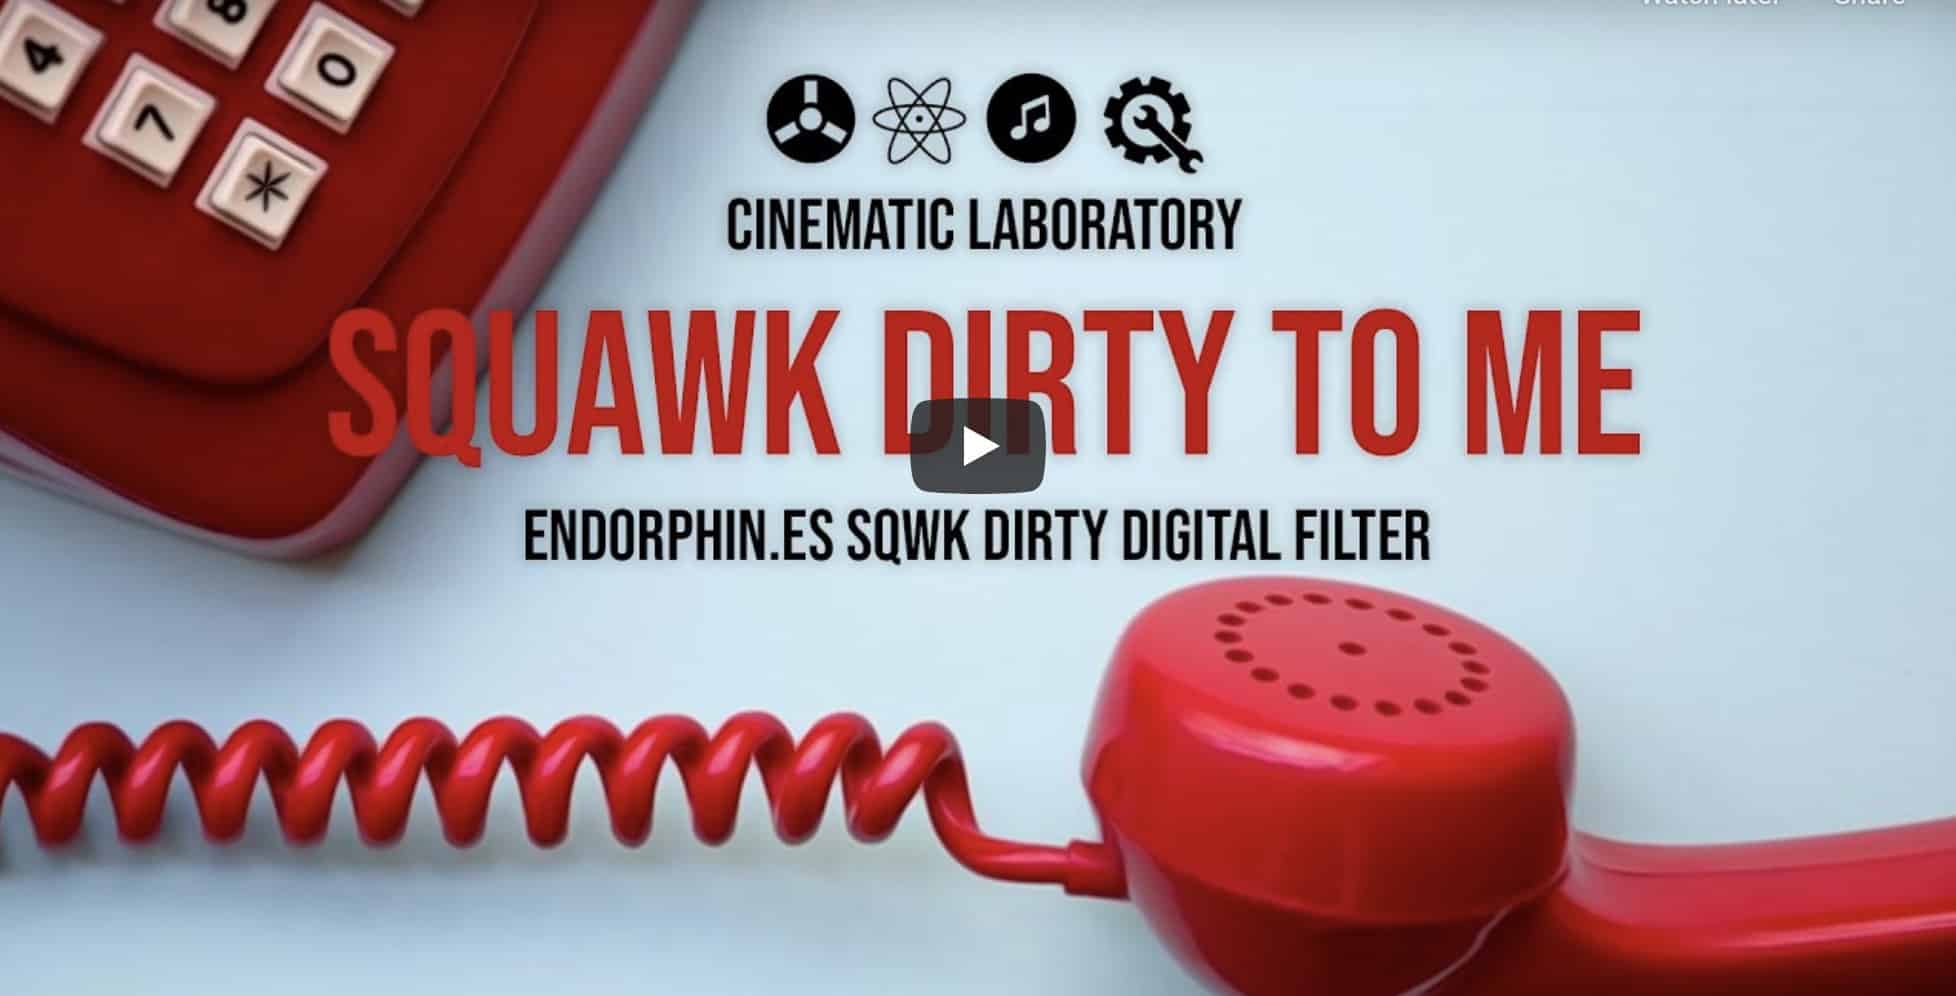 Squawk Dirty To Me Endorphin.es Sqwk Dirty digital filter